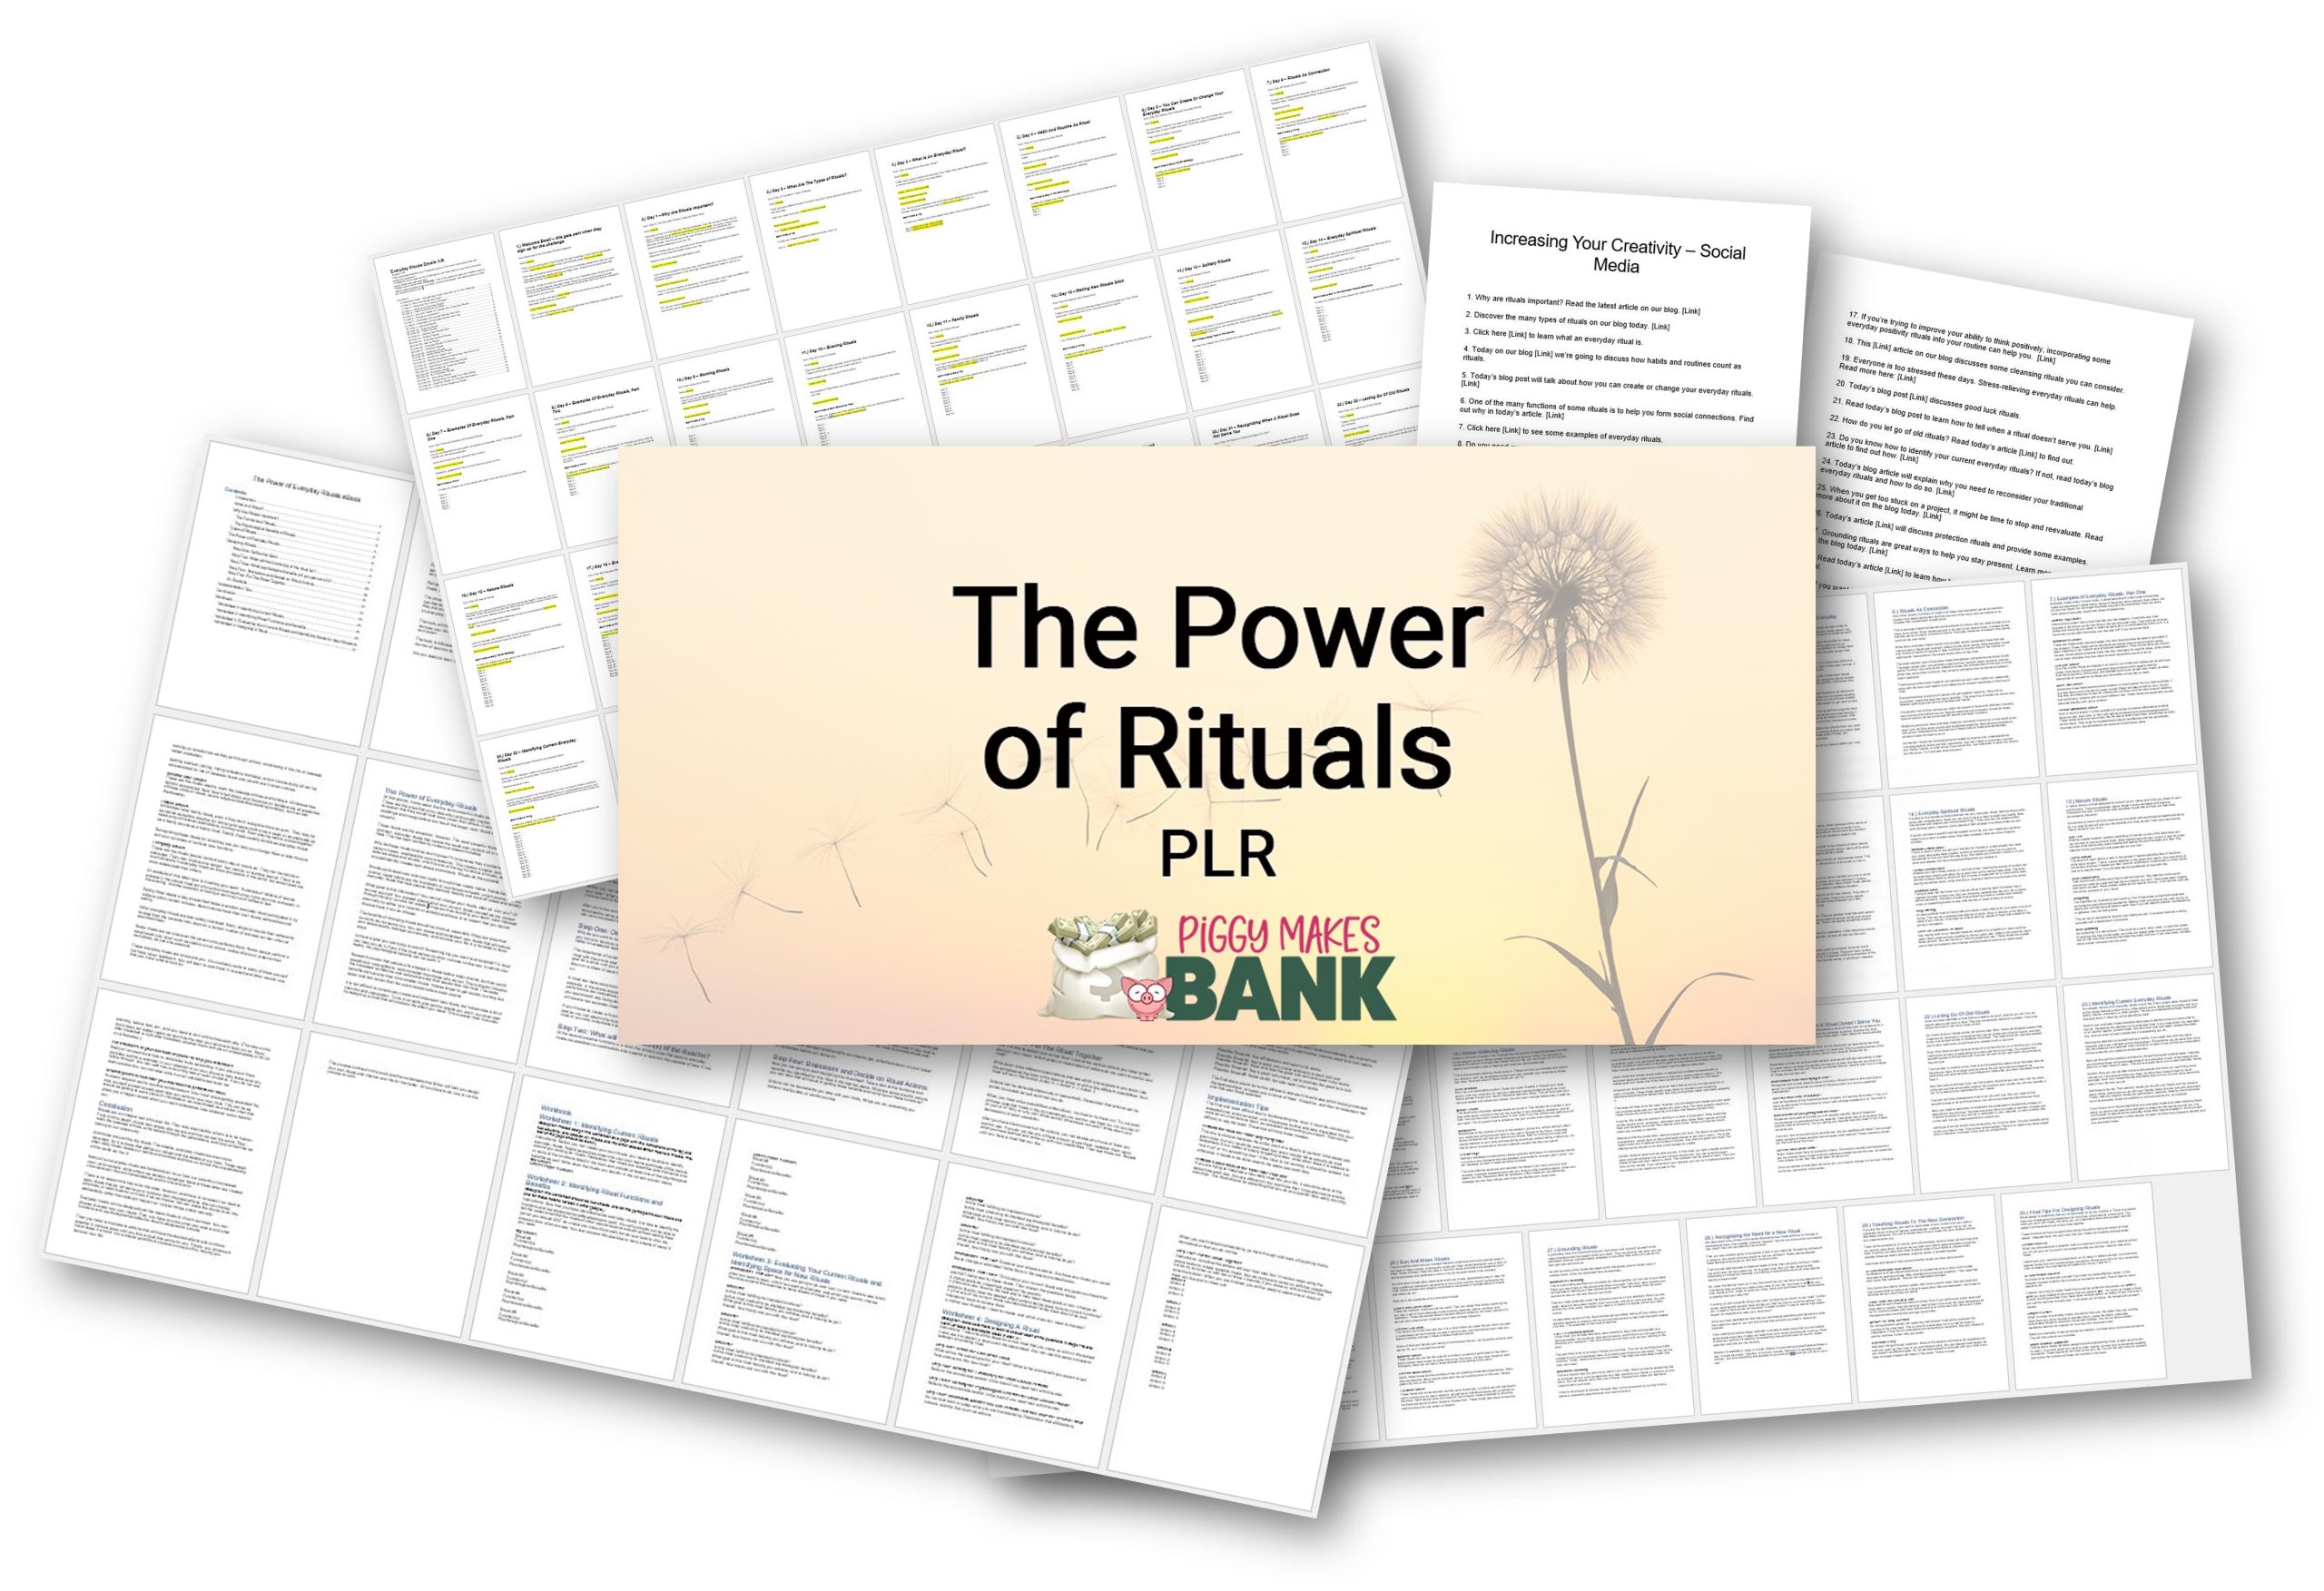 The Power of Rituals